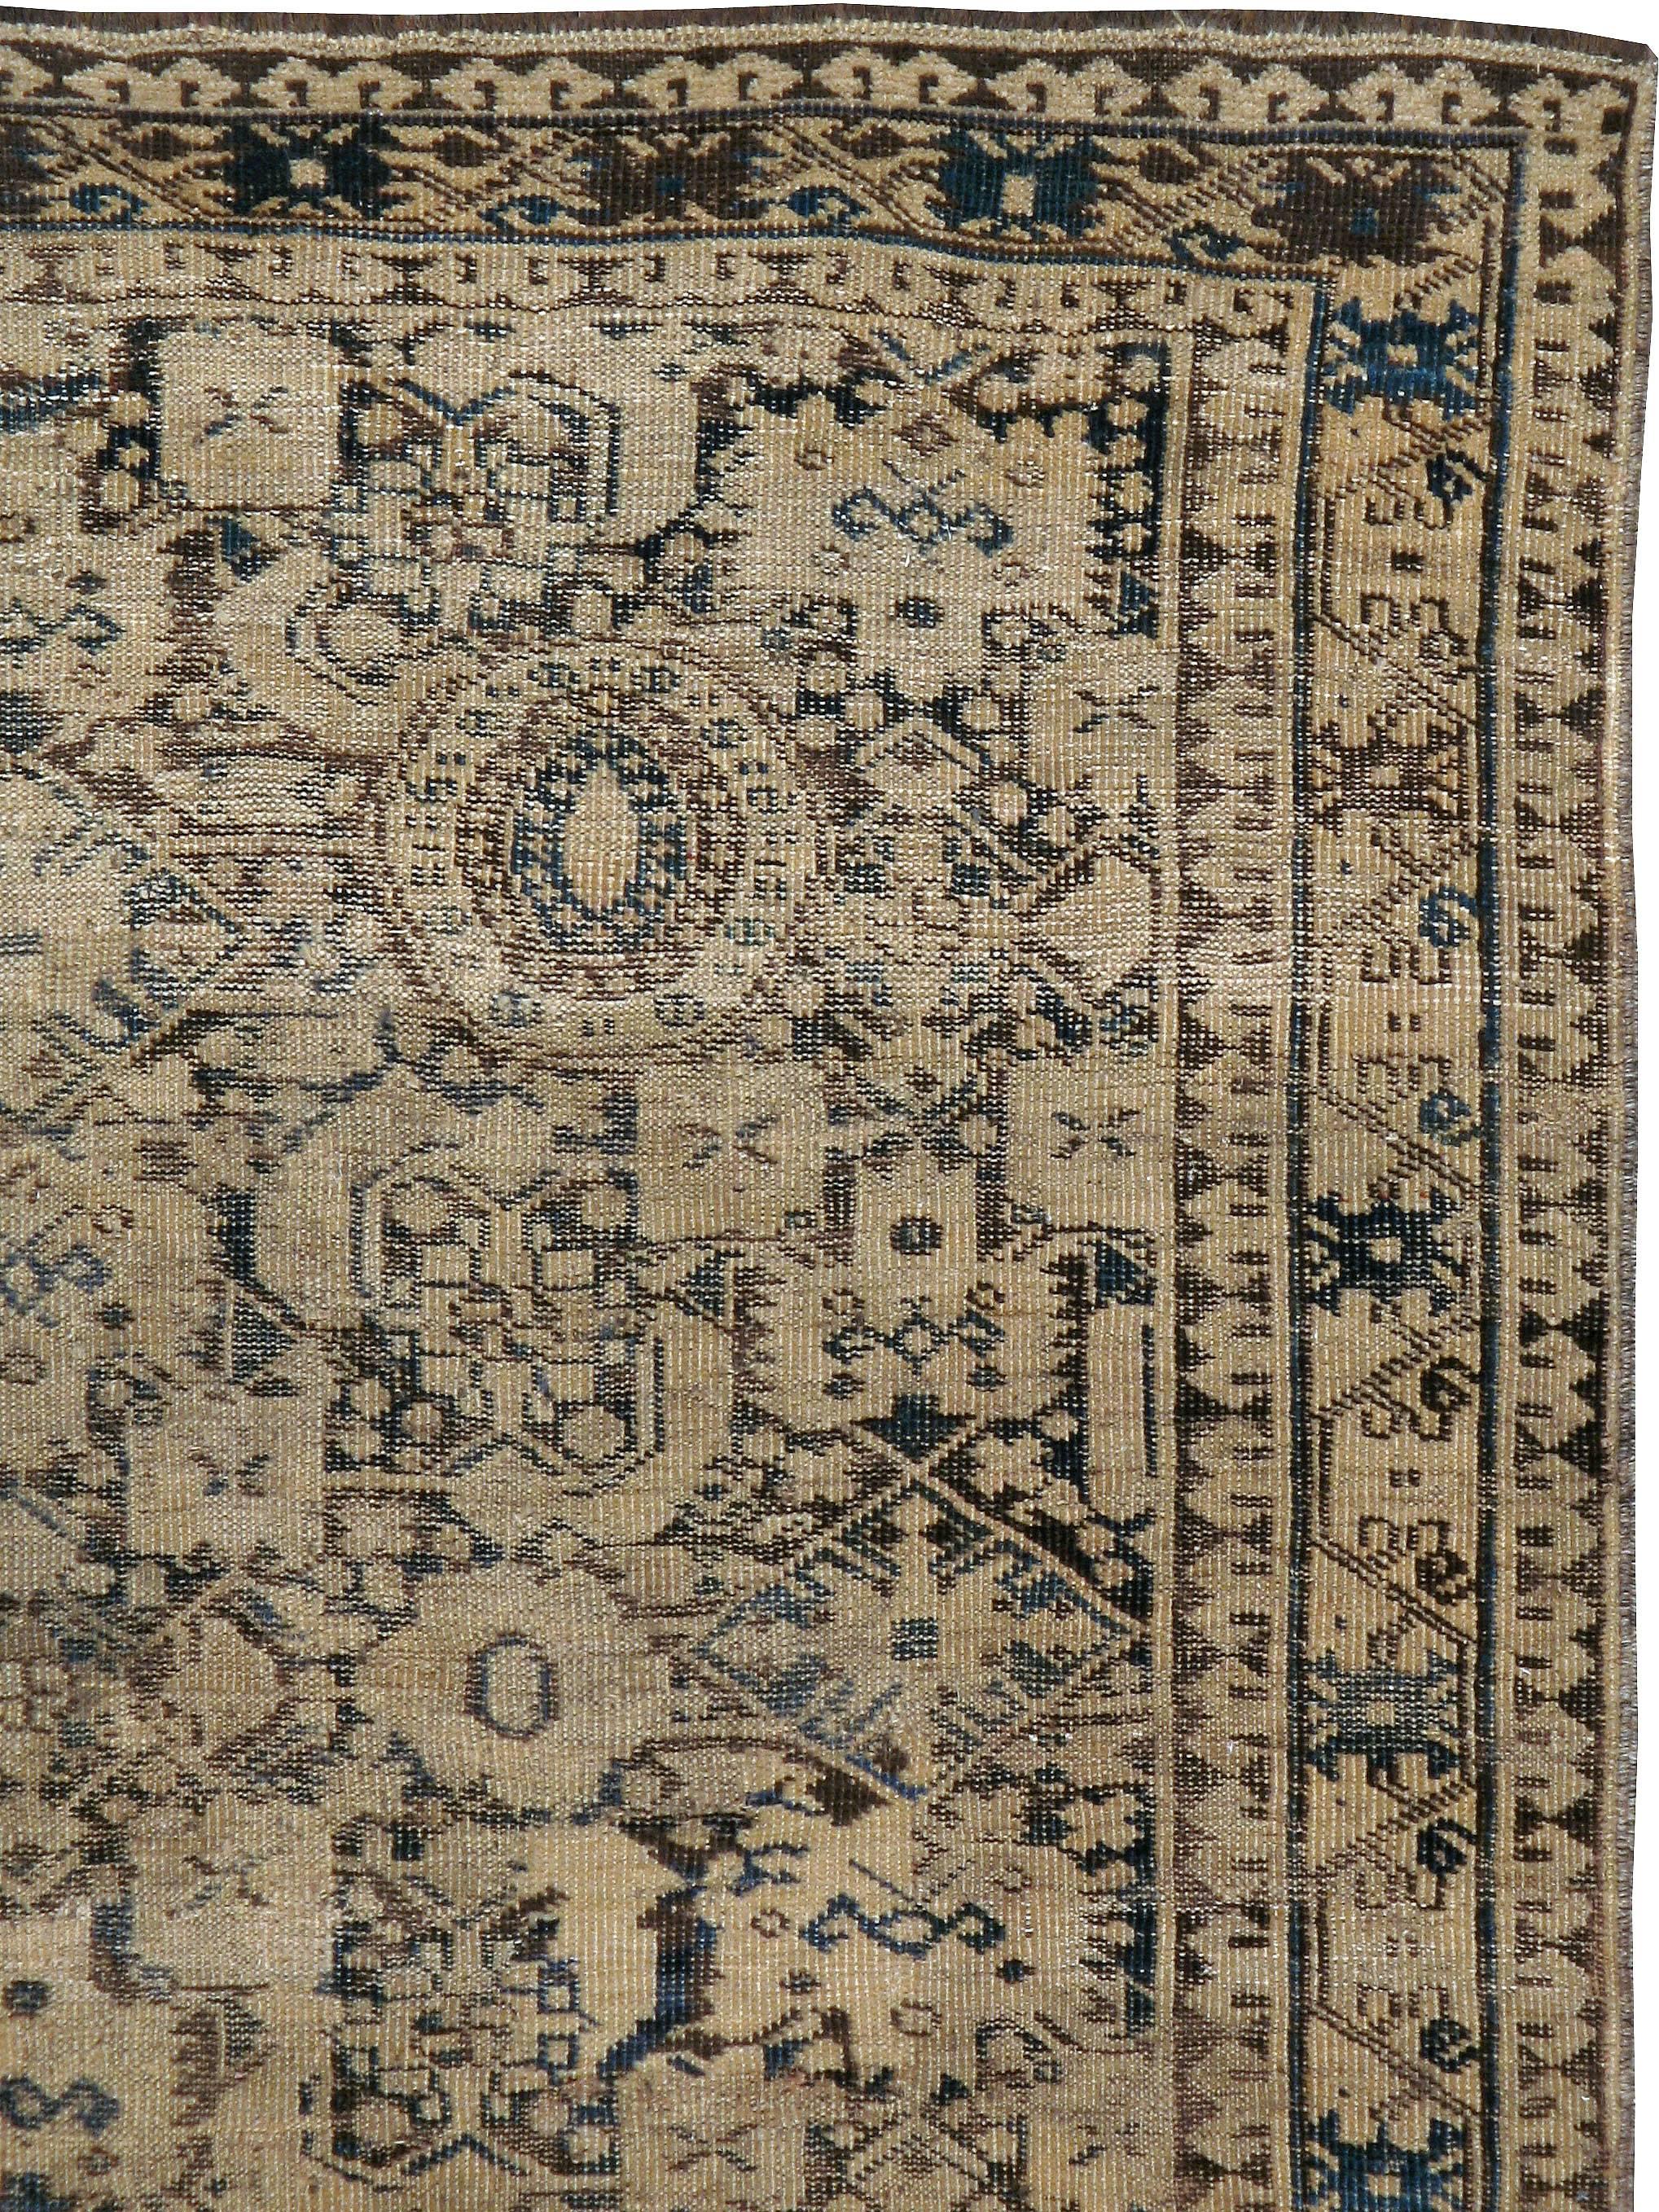 Tribal Antique Central Asian Turkoman Rug For Sale